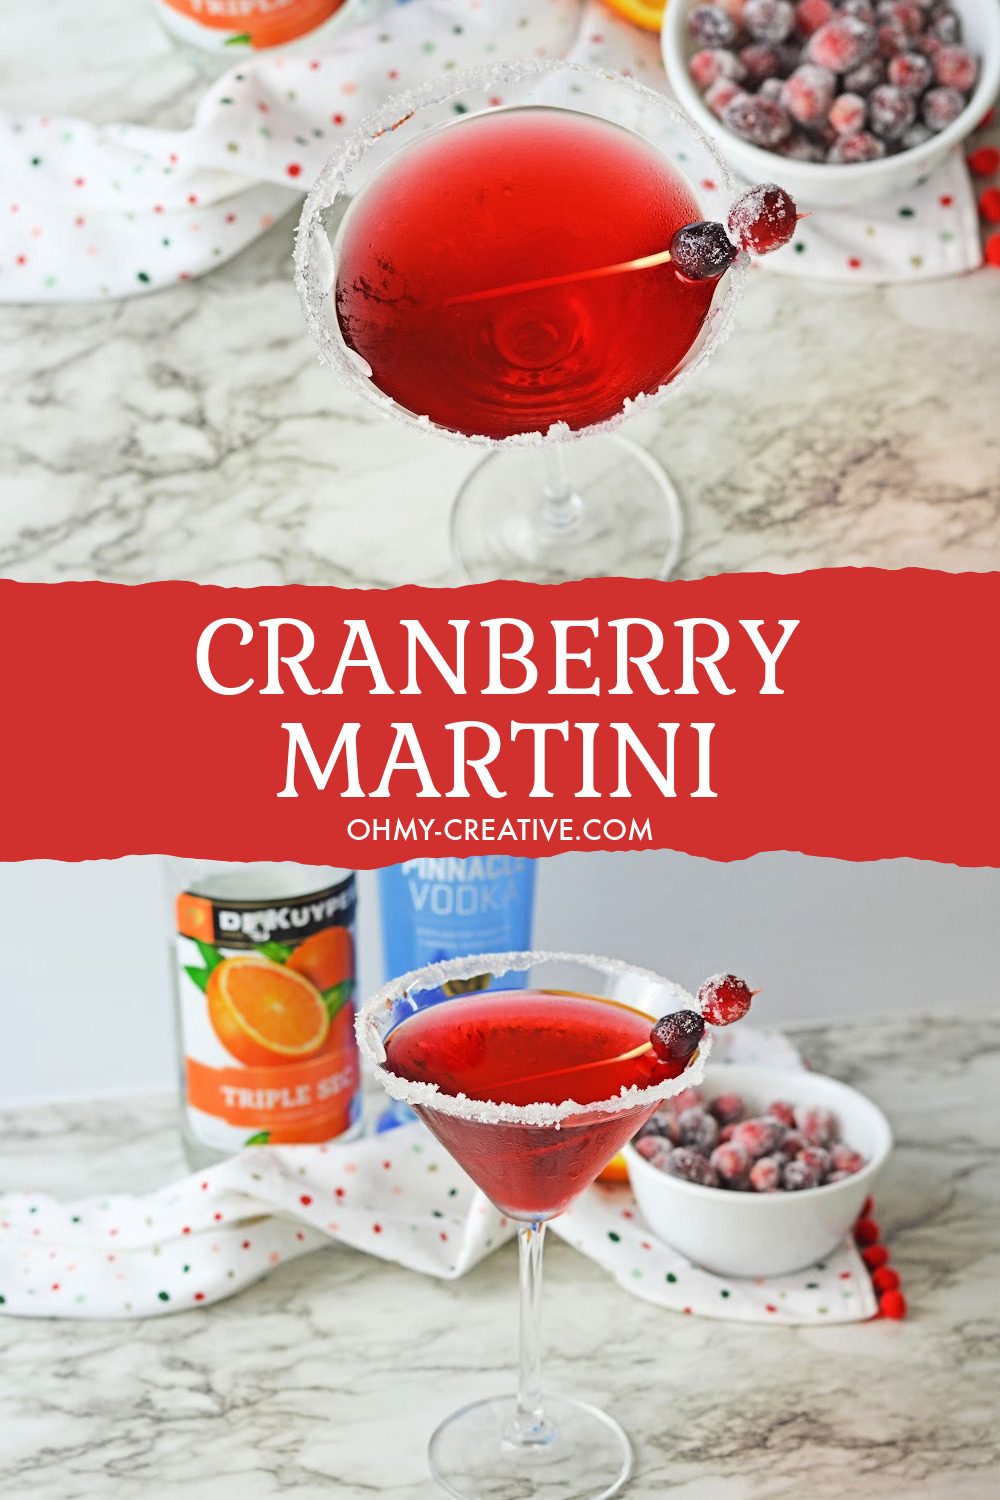 A cranberry martini with a sugar rim garnished with a skewer of sugar coated cranberries. Cranberry ingredients can be seen in the background.